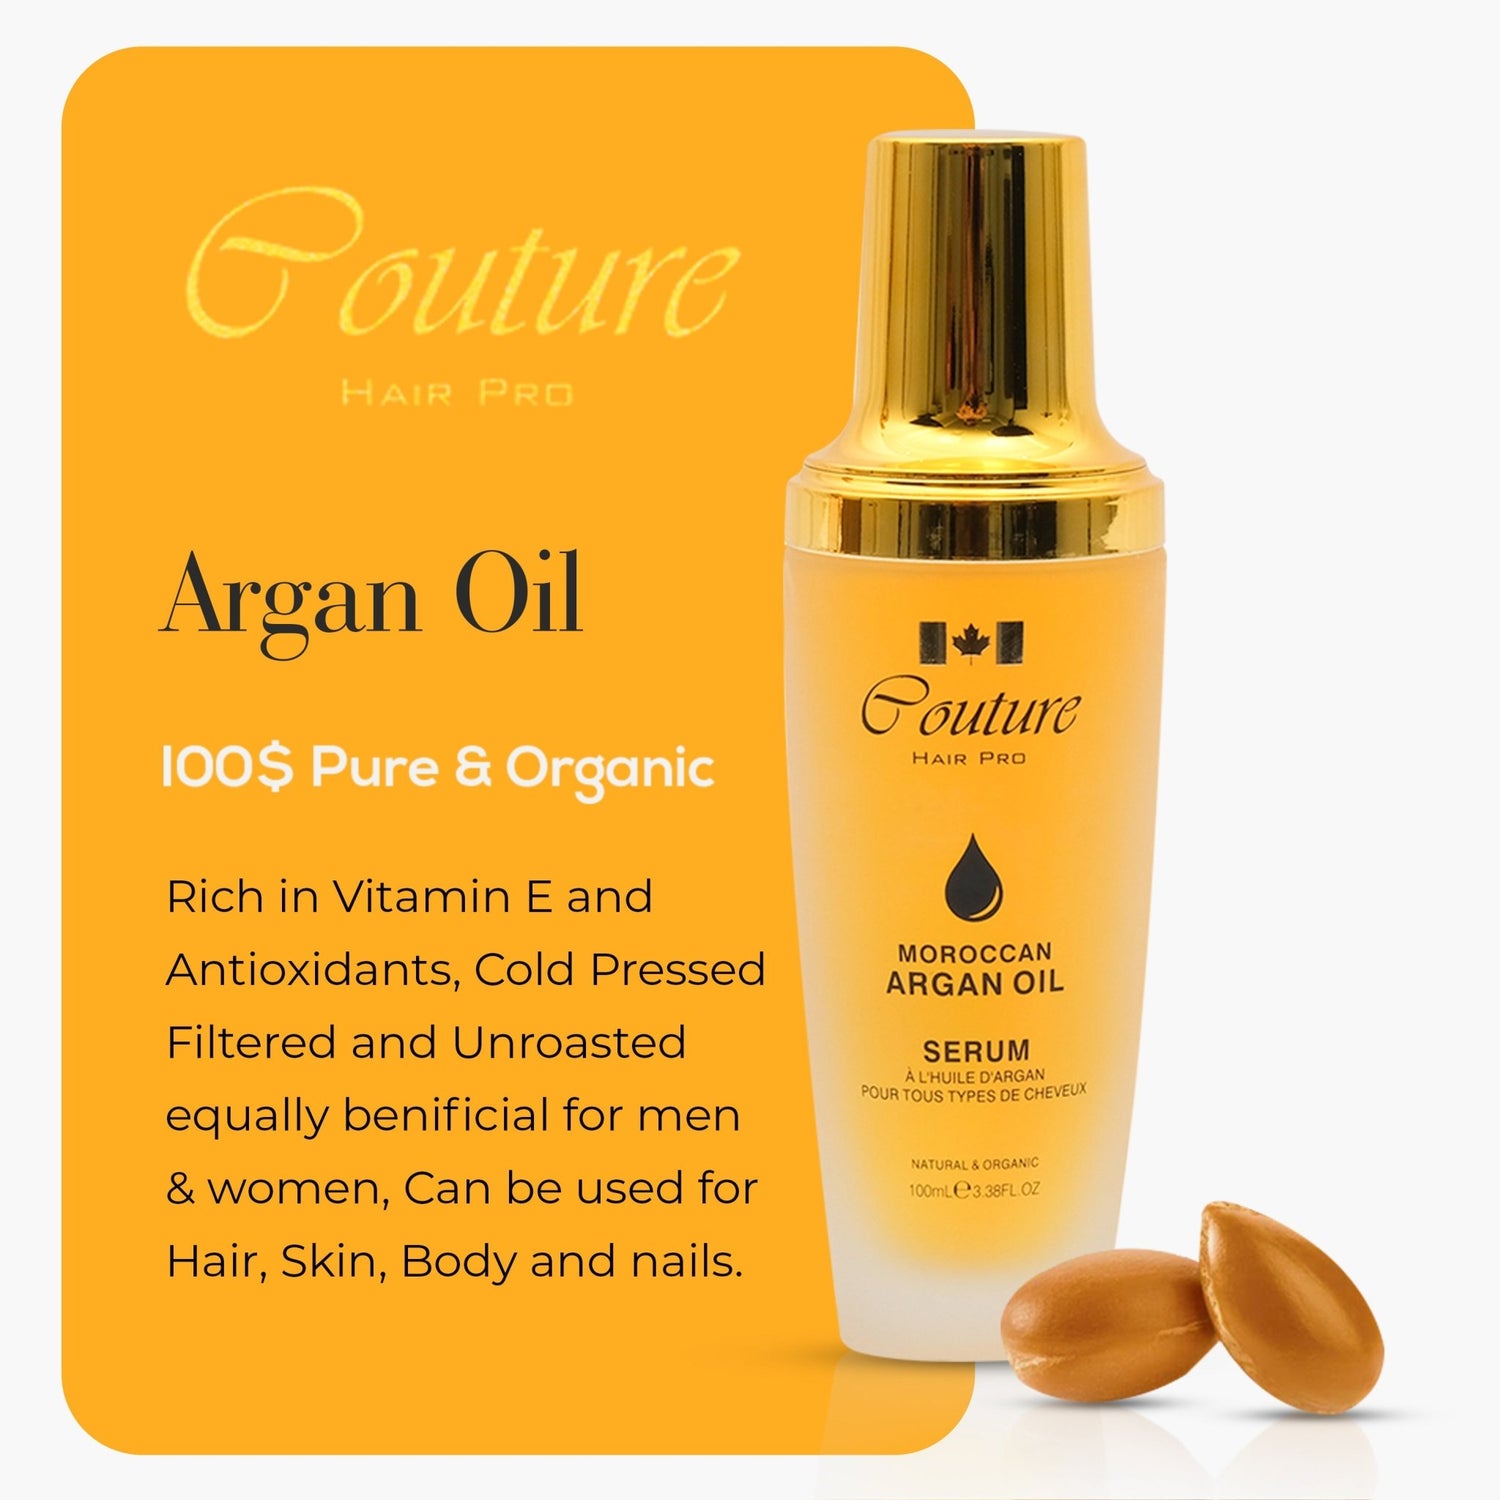 Couture Hair Pro Moroccan Argan Oil - Best Hair Oil - #1 Selling Hair Tools Brand in the Middle East - Couture Hair Pro